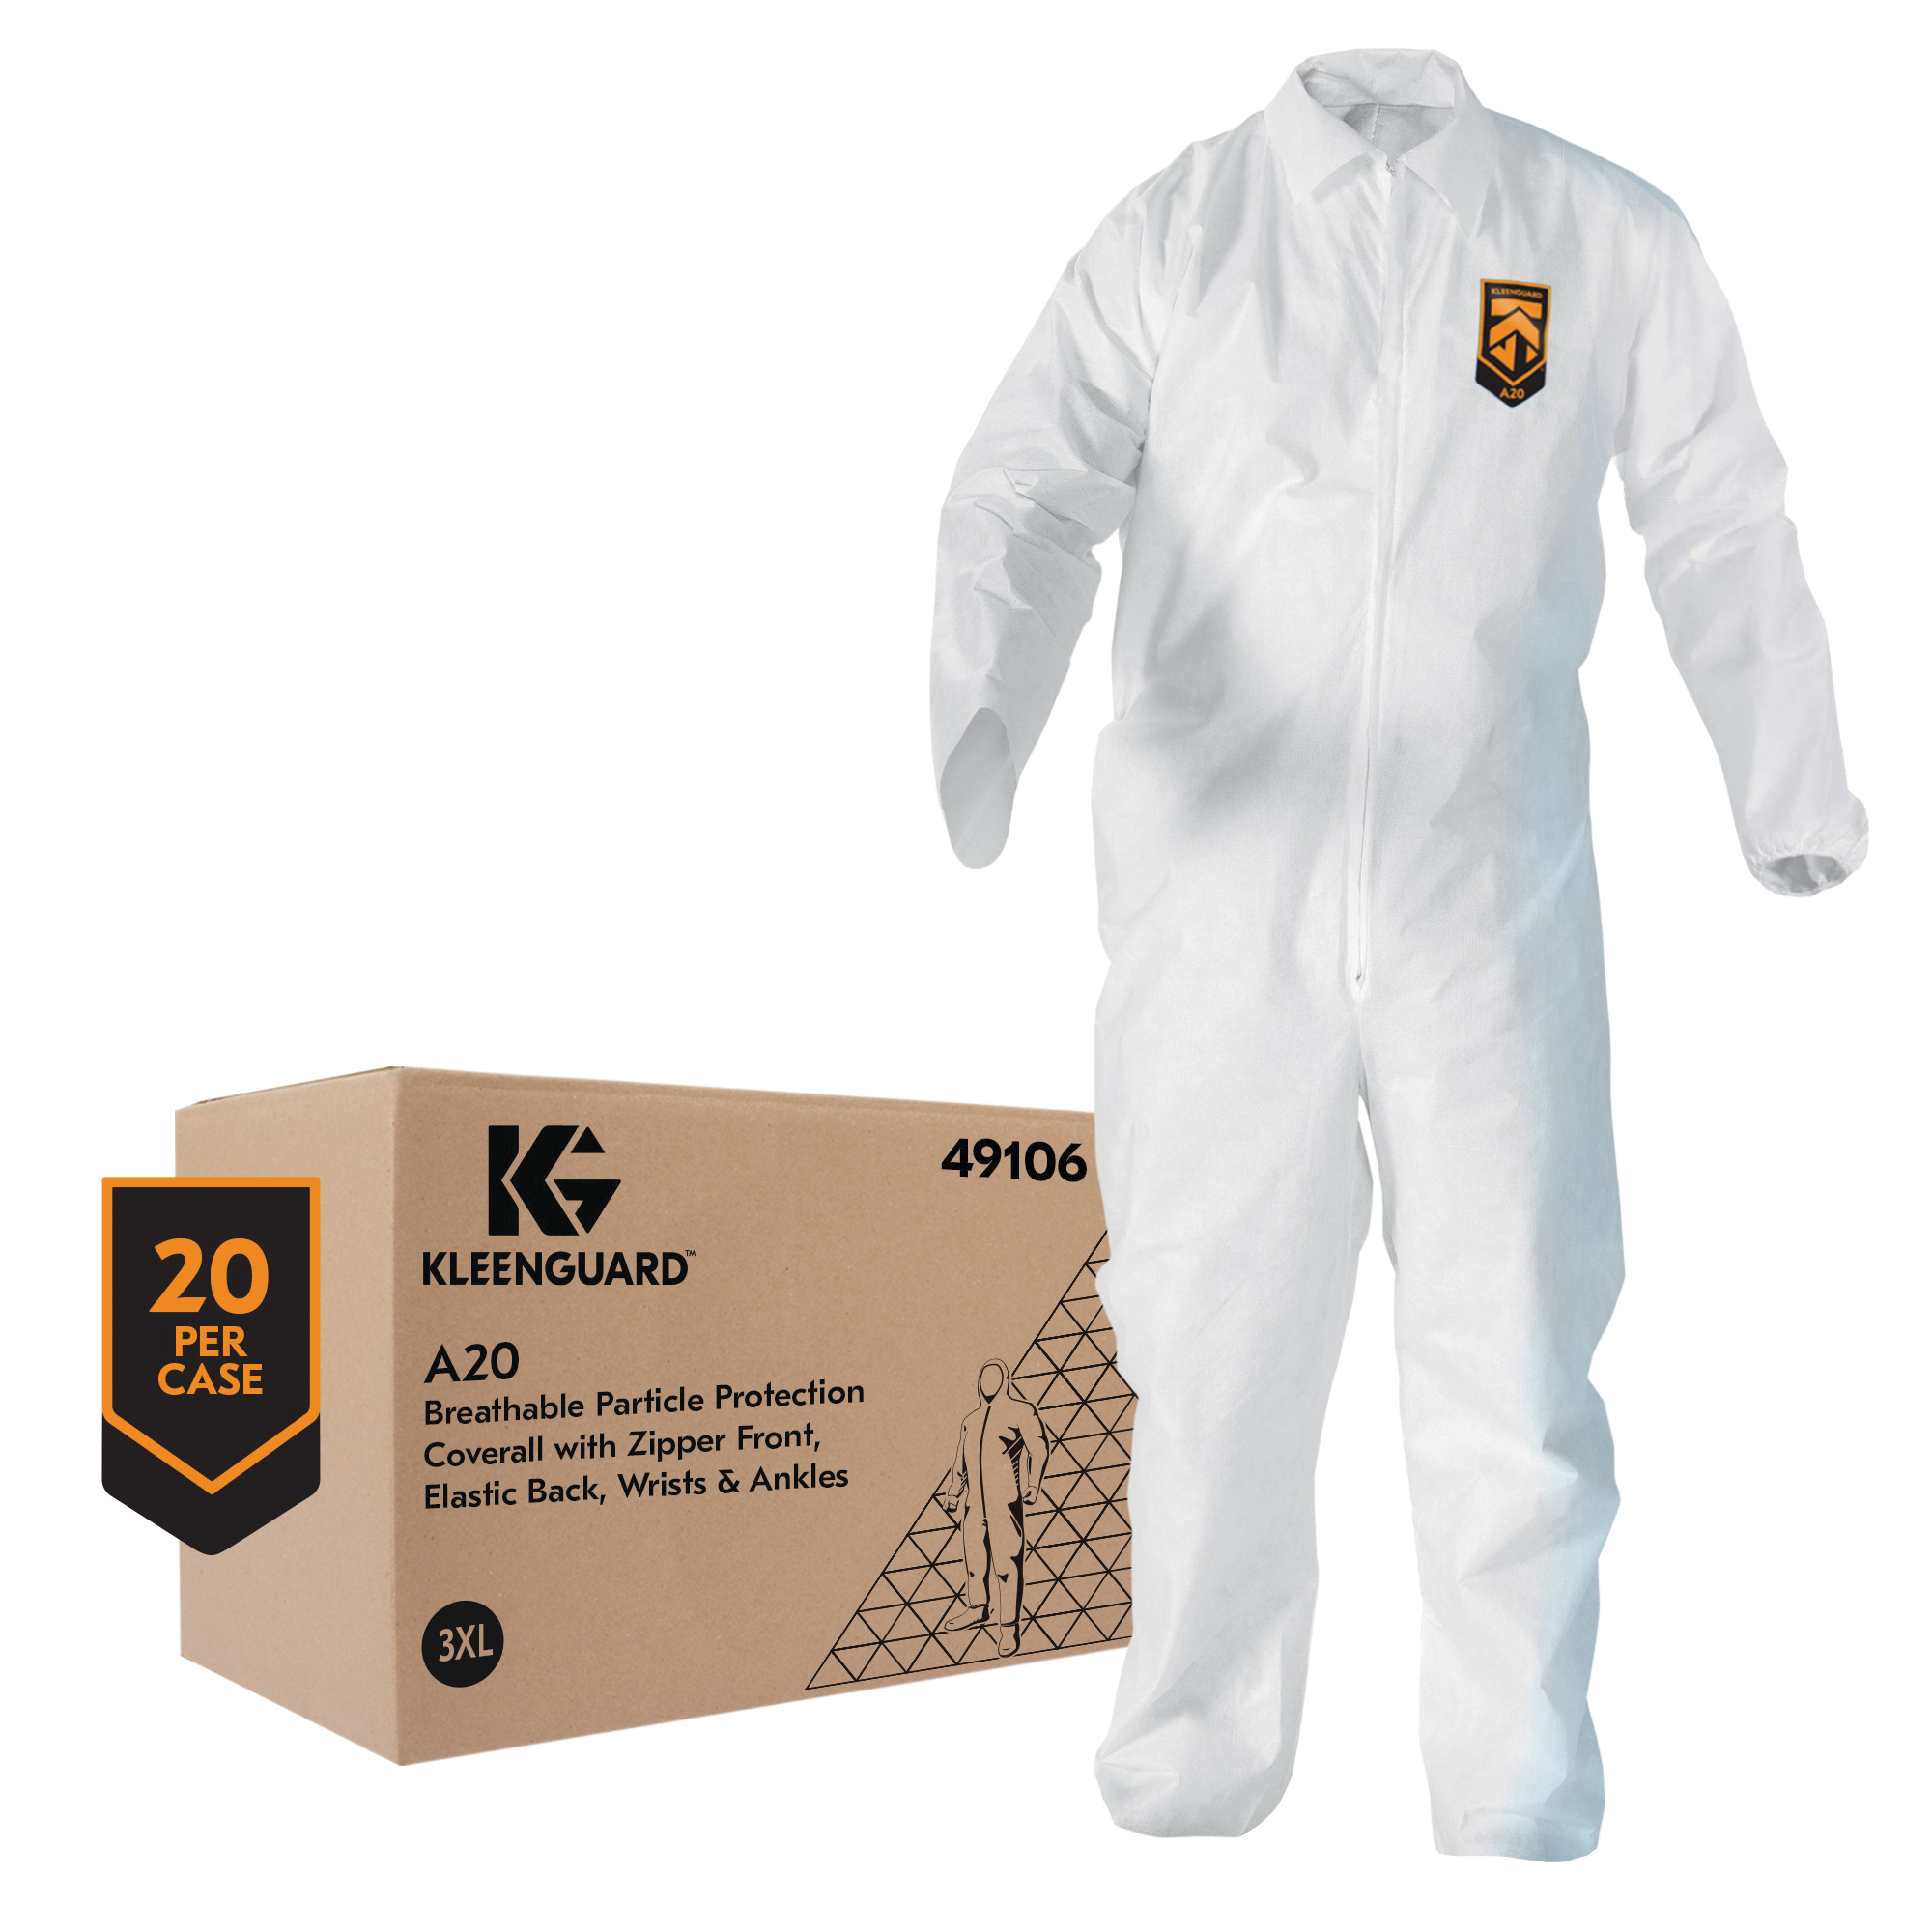 KleenGuard™ 49007 A20 Breathable Lightweight Disposable Coverall, 4XL, White, SMS Fabric, 32-3/4 in Chest, 42 in L Inseam